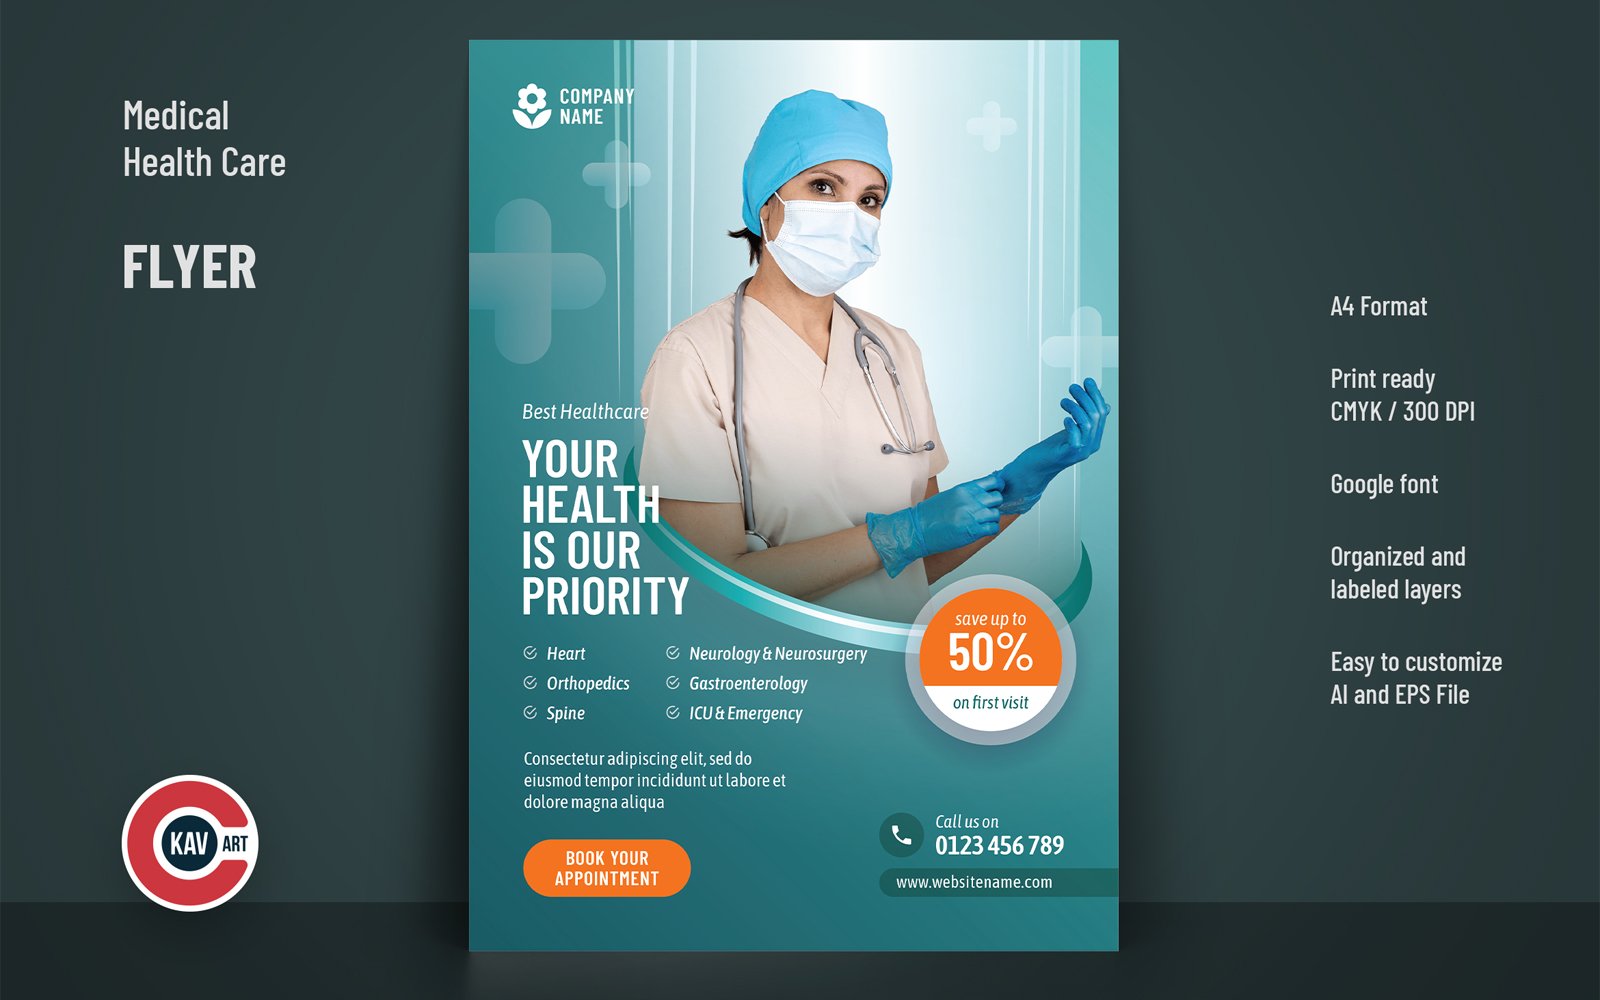 Flyer or Poster Template for Medial Health Care - 00202